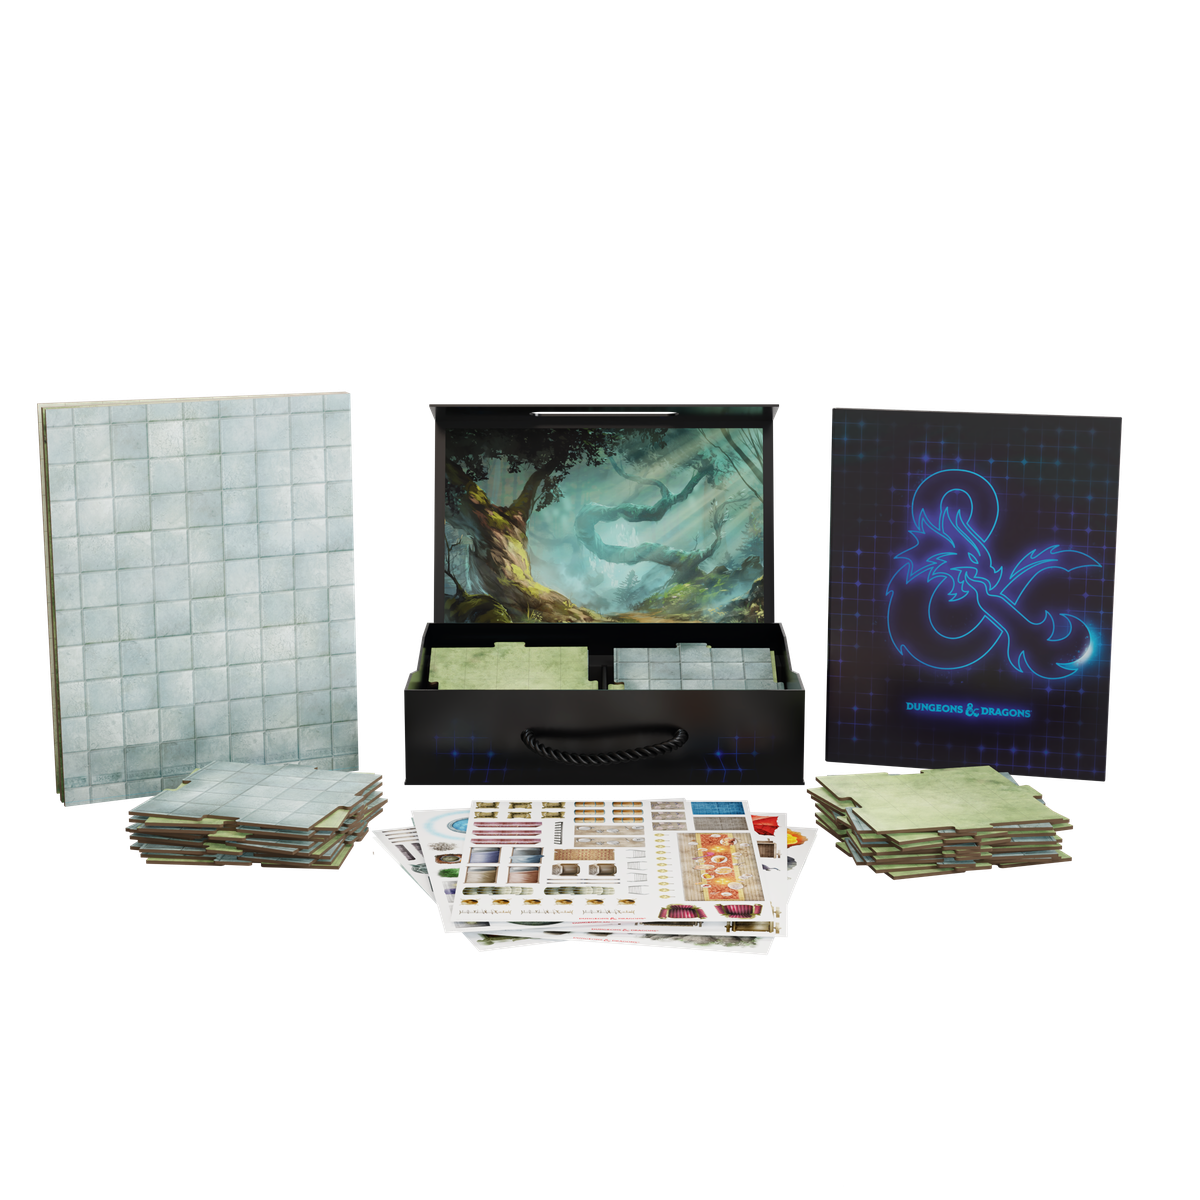 Product image showing a foldable map, double-sided and interlocking map tiles, stickers, and the carrying case for the Terrain Campaign Case.